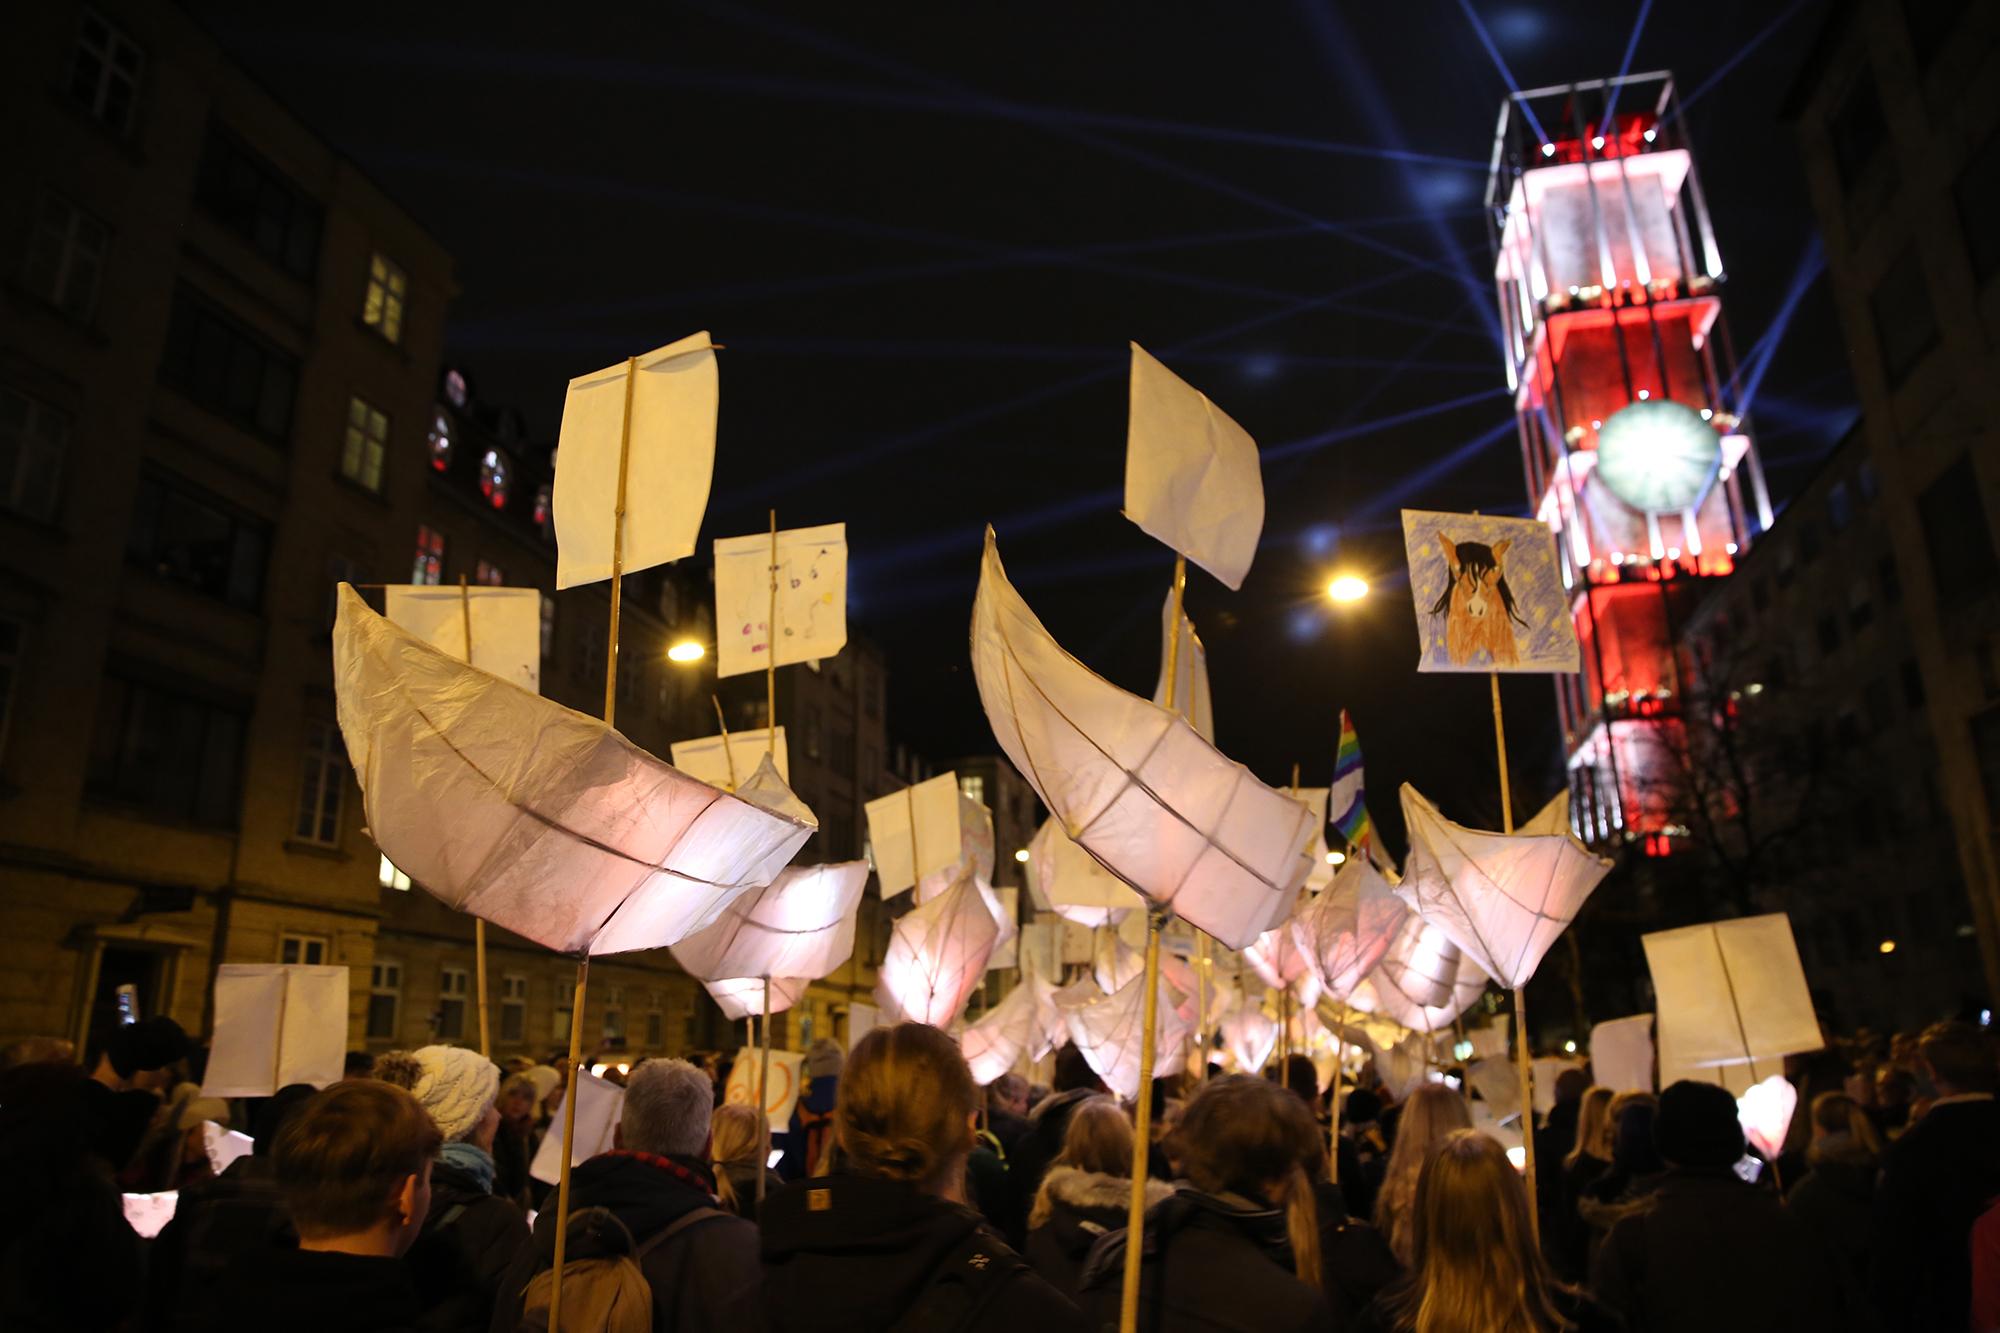 A parade of paper lanterns and children's drawings.